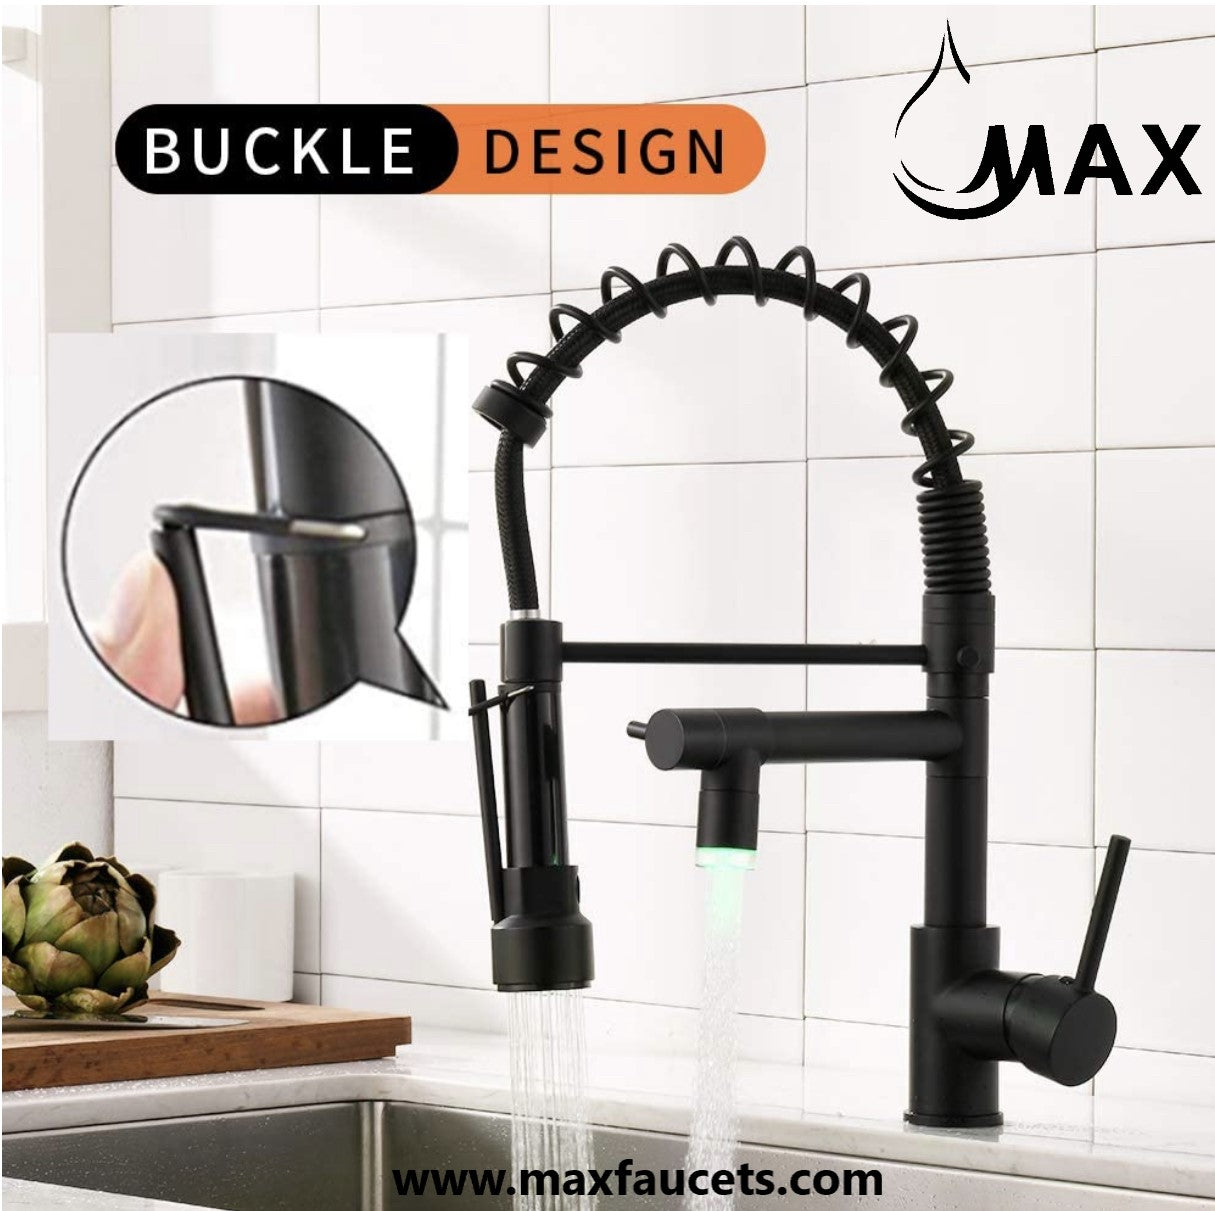 Pull-Down Flexible Kitchen Faucet With Separate Pot Filler Spout and LED Light 19" Matte Black Finish